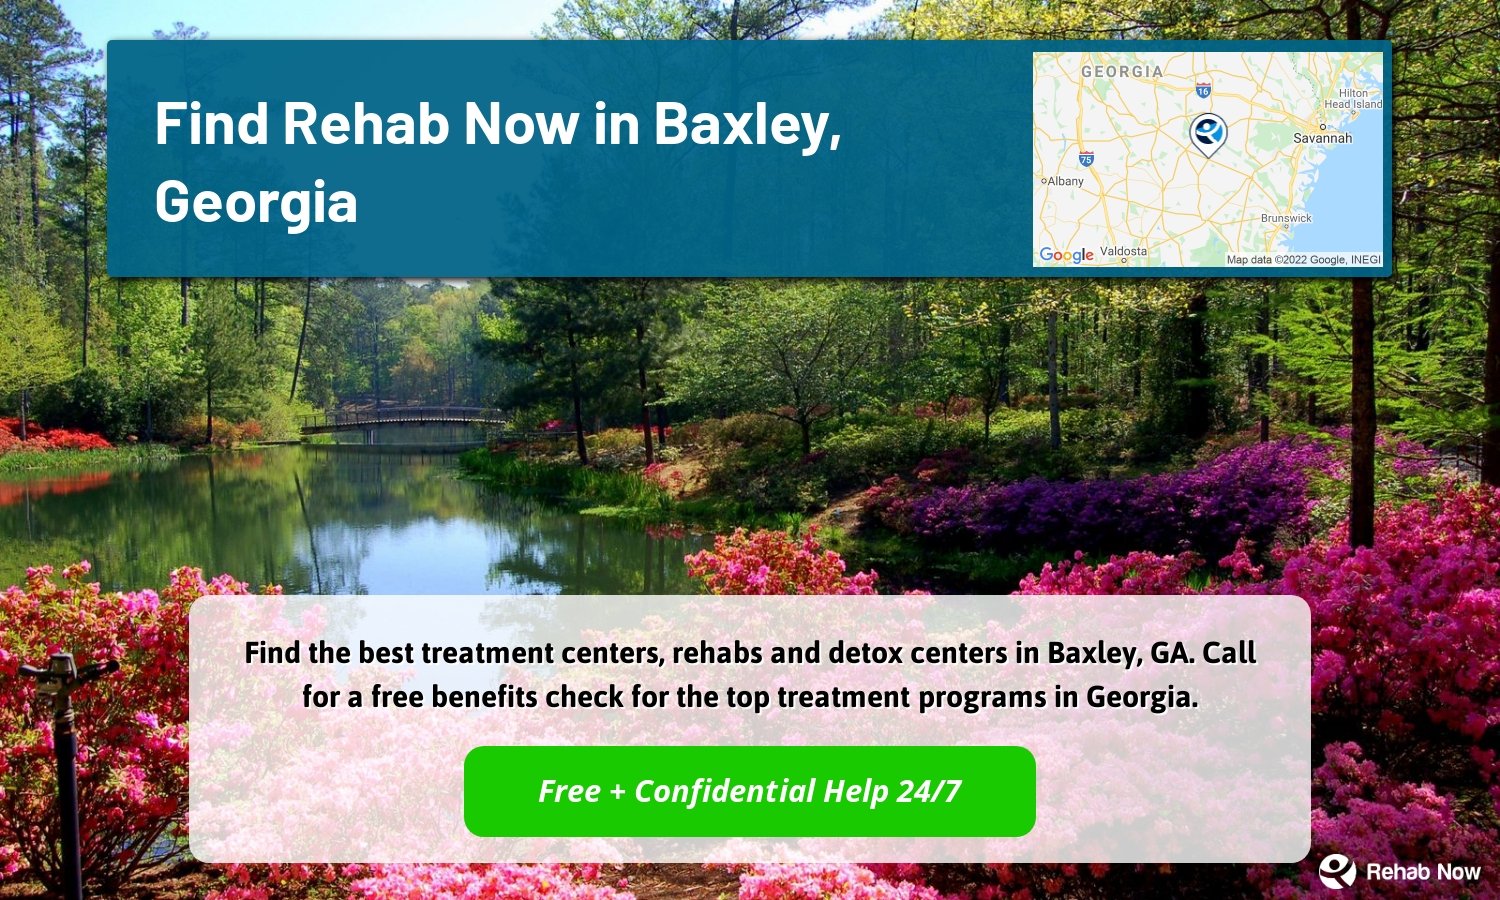 Find the best treatment centers, rehabs and detox centers in Baxley, GA. Call for a free benefits check for the top treatment programs in Georgia.